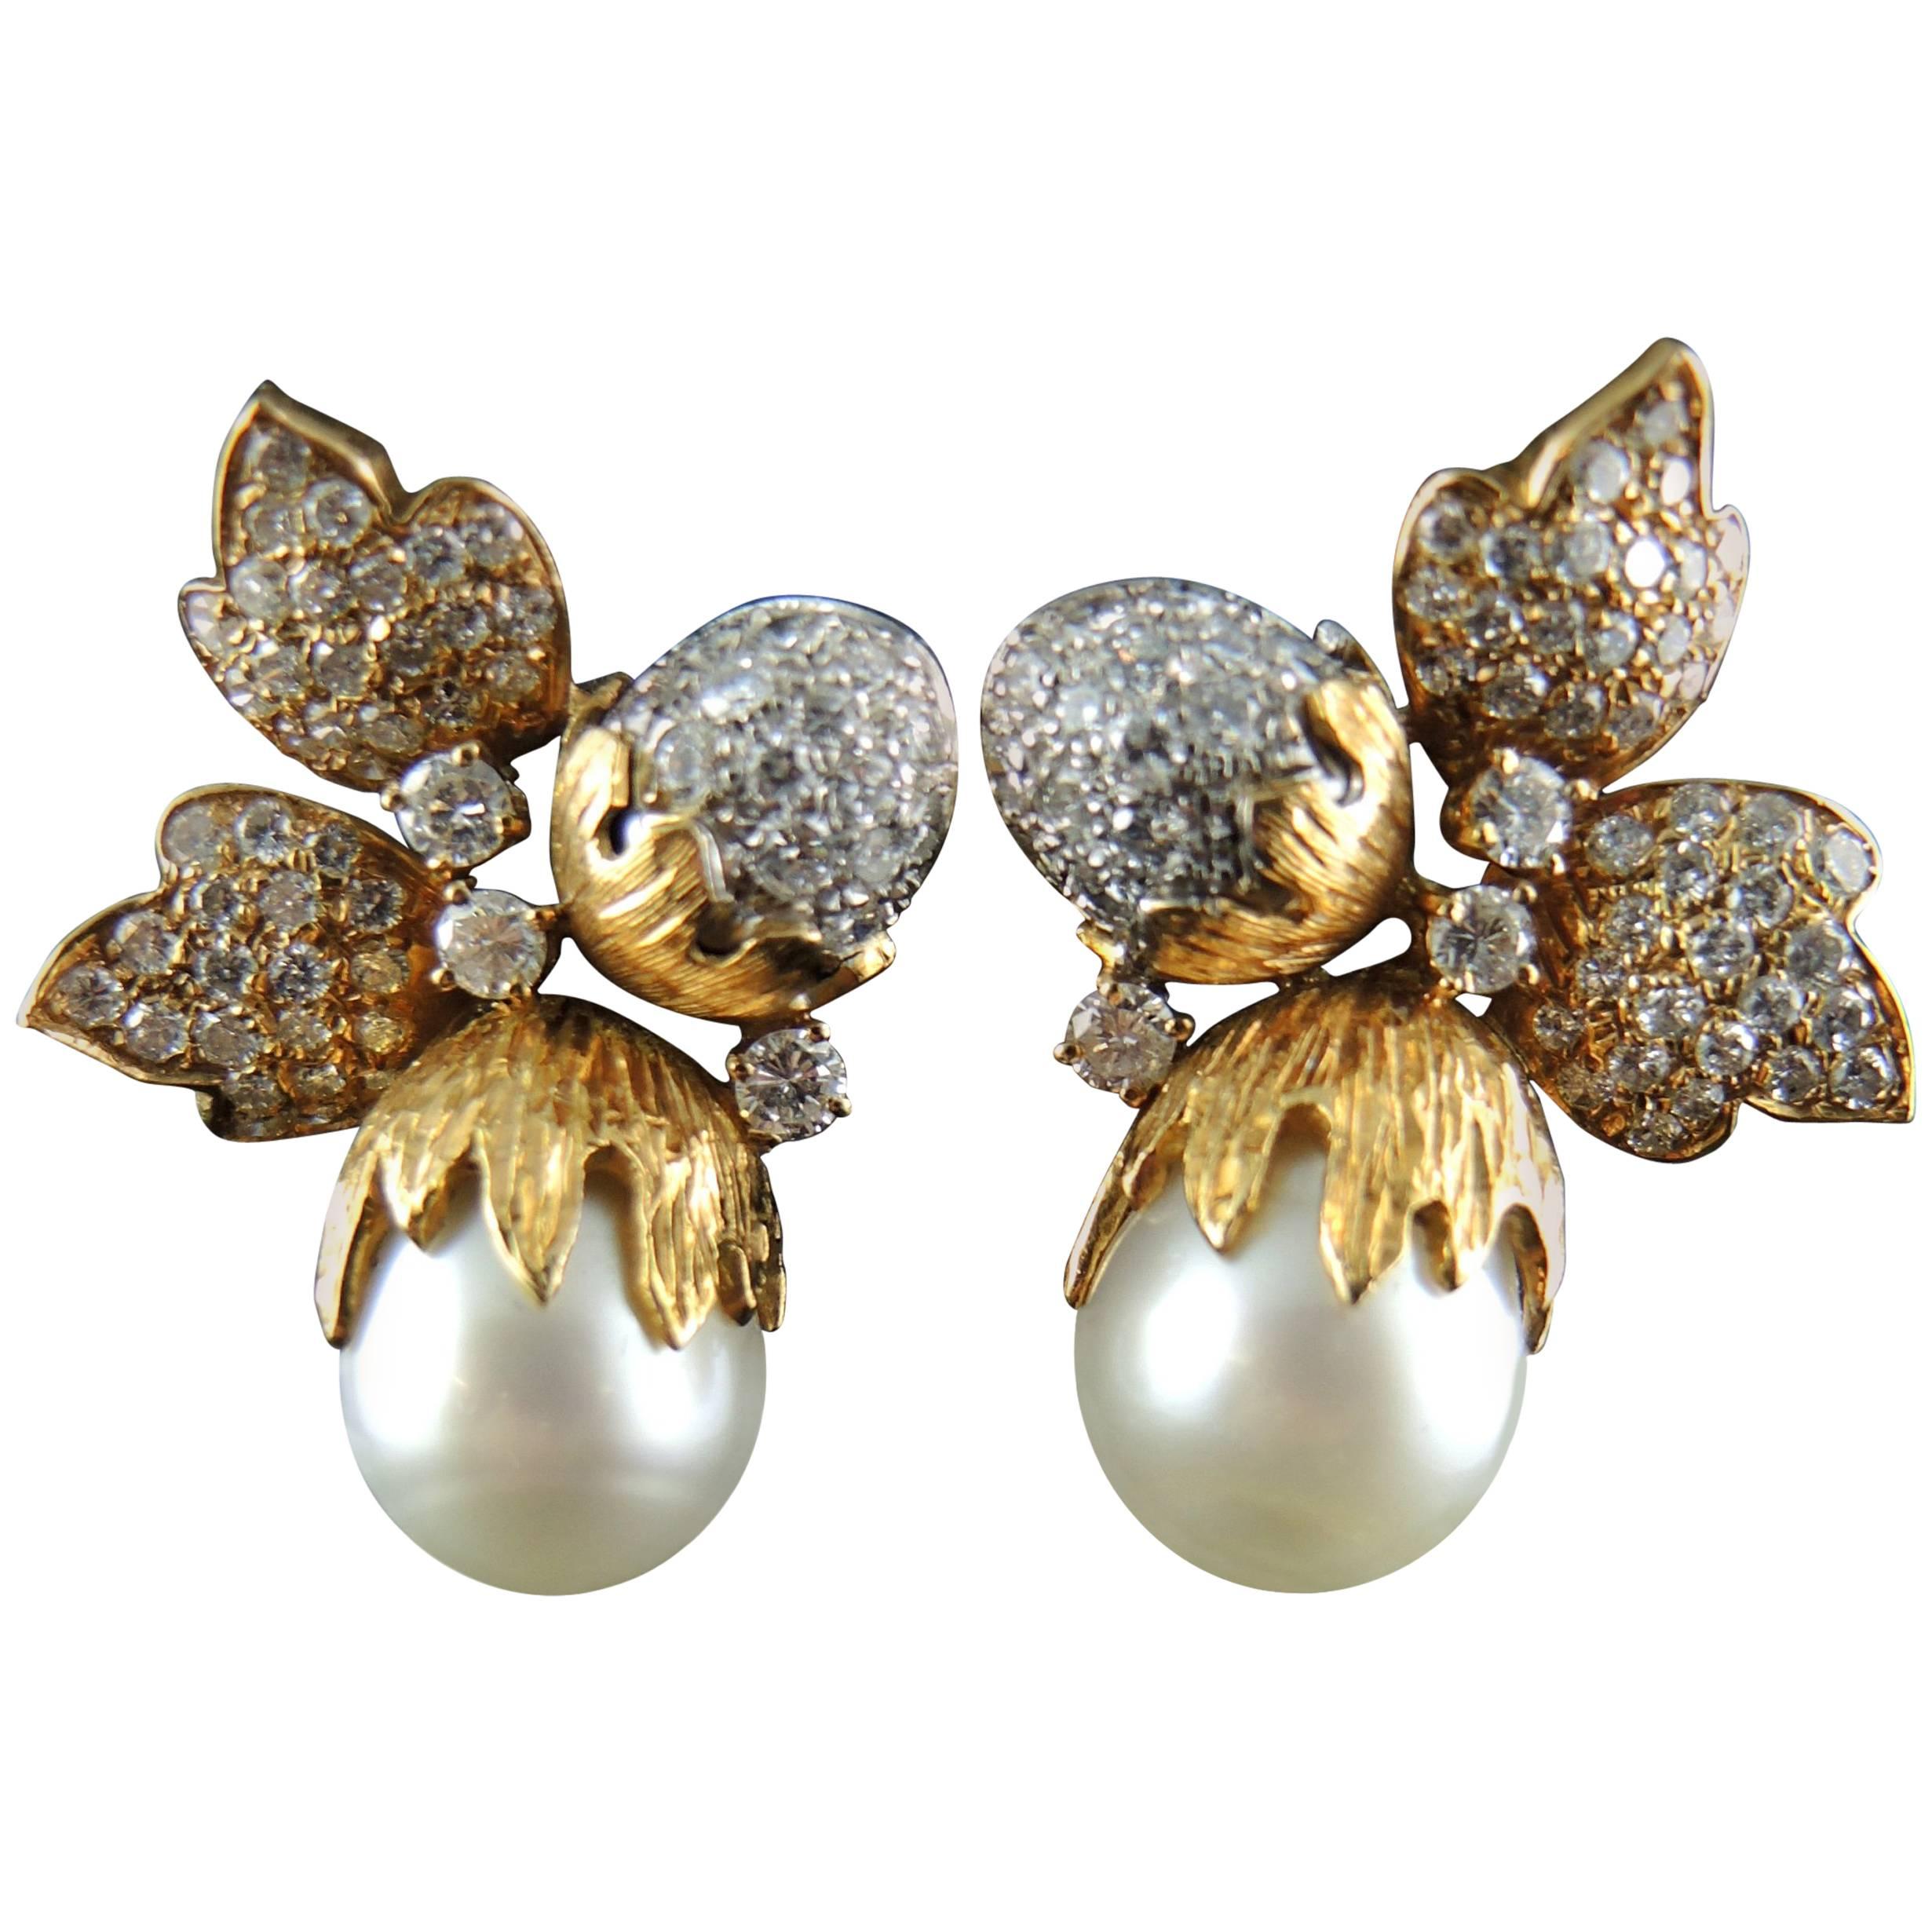 Hazelnuts' Acorns and Leaves Earrings Set with Diamonds and South Sea Pearls